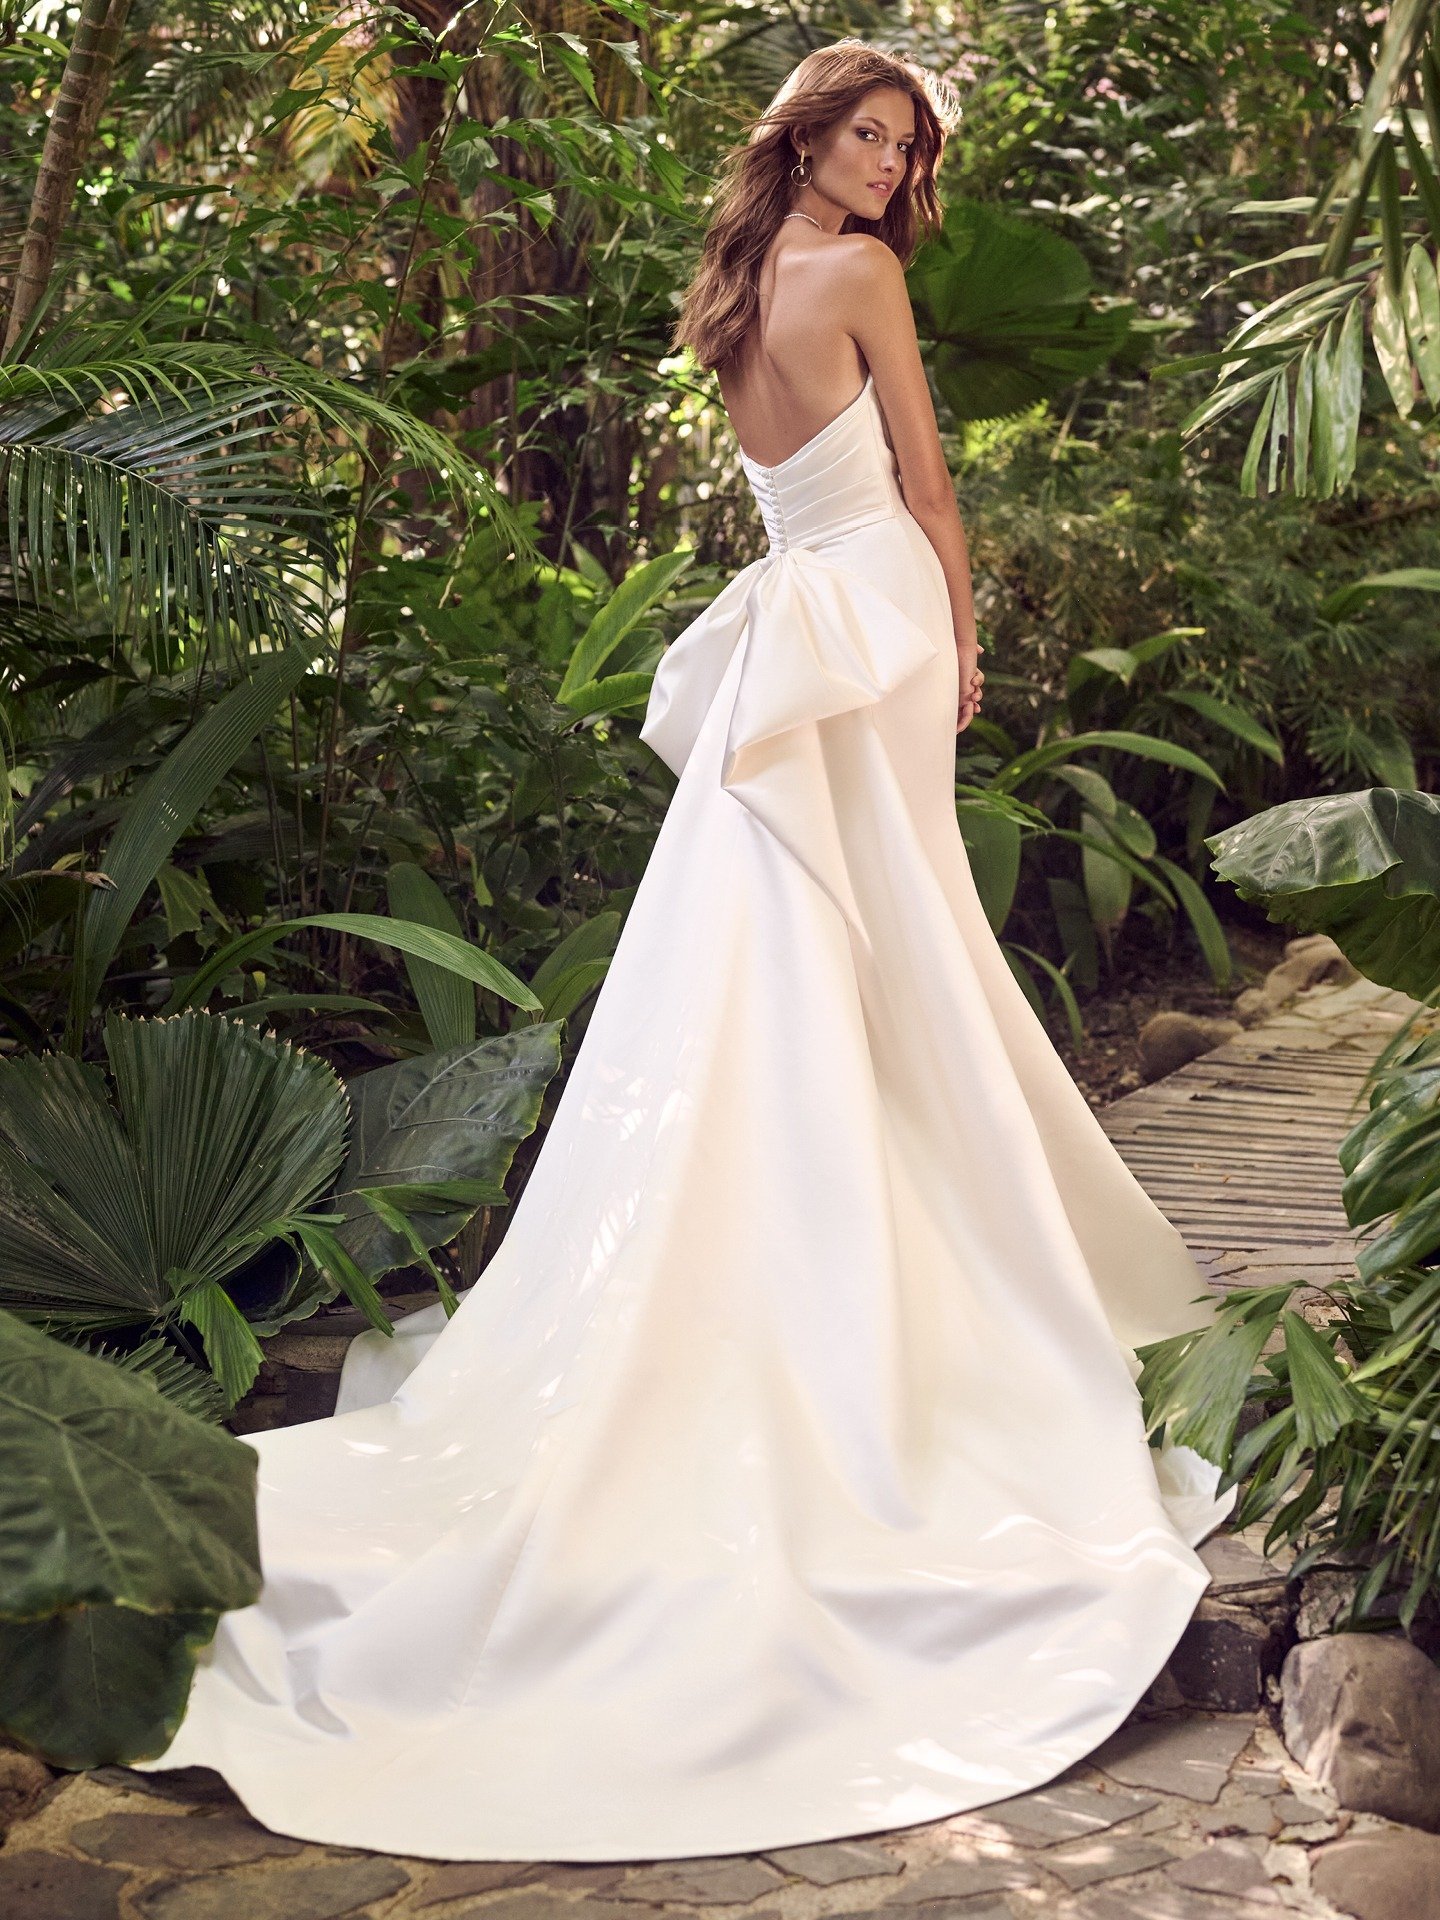 vp_maggie-sottero-hilo-marie-fit-and-flare-wedding-dr_20230817161555_4.jpeg